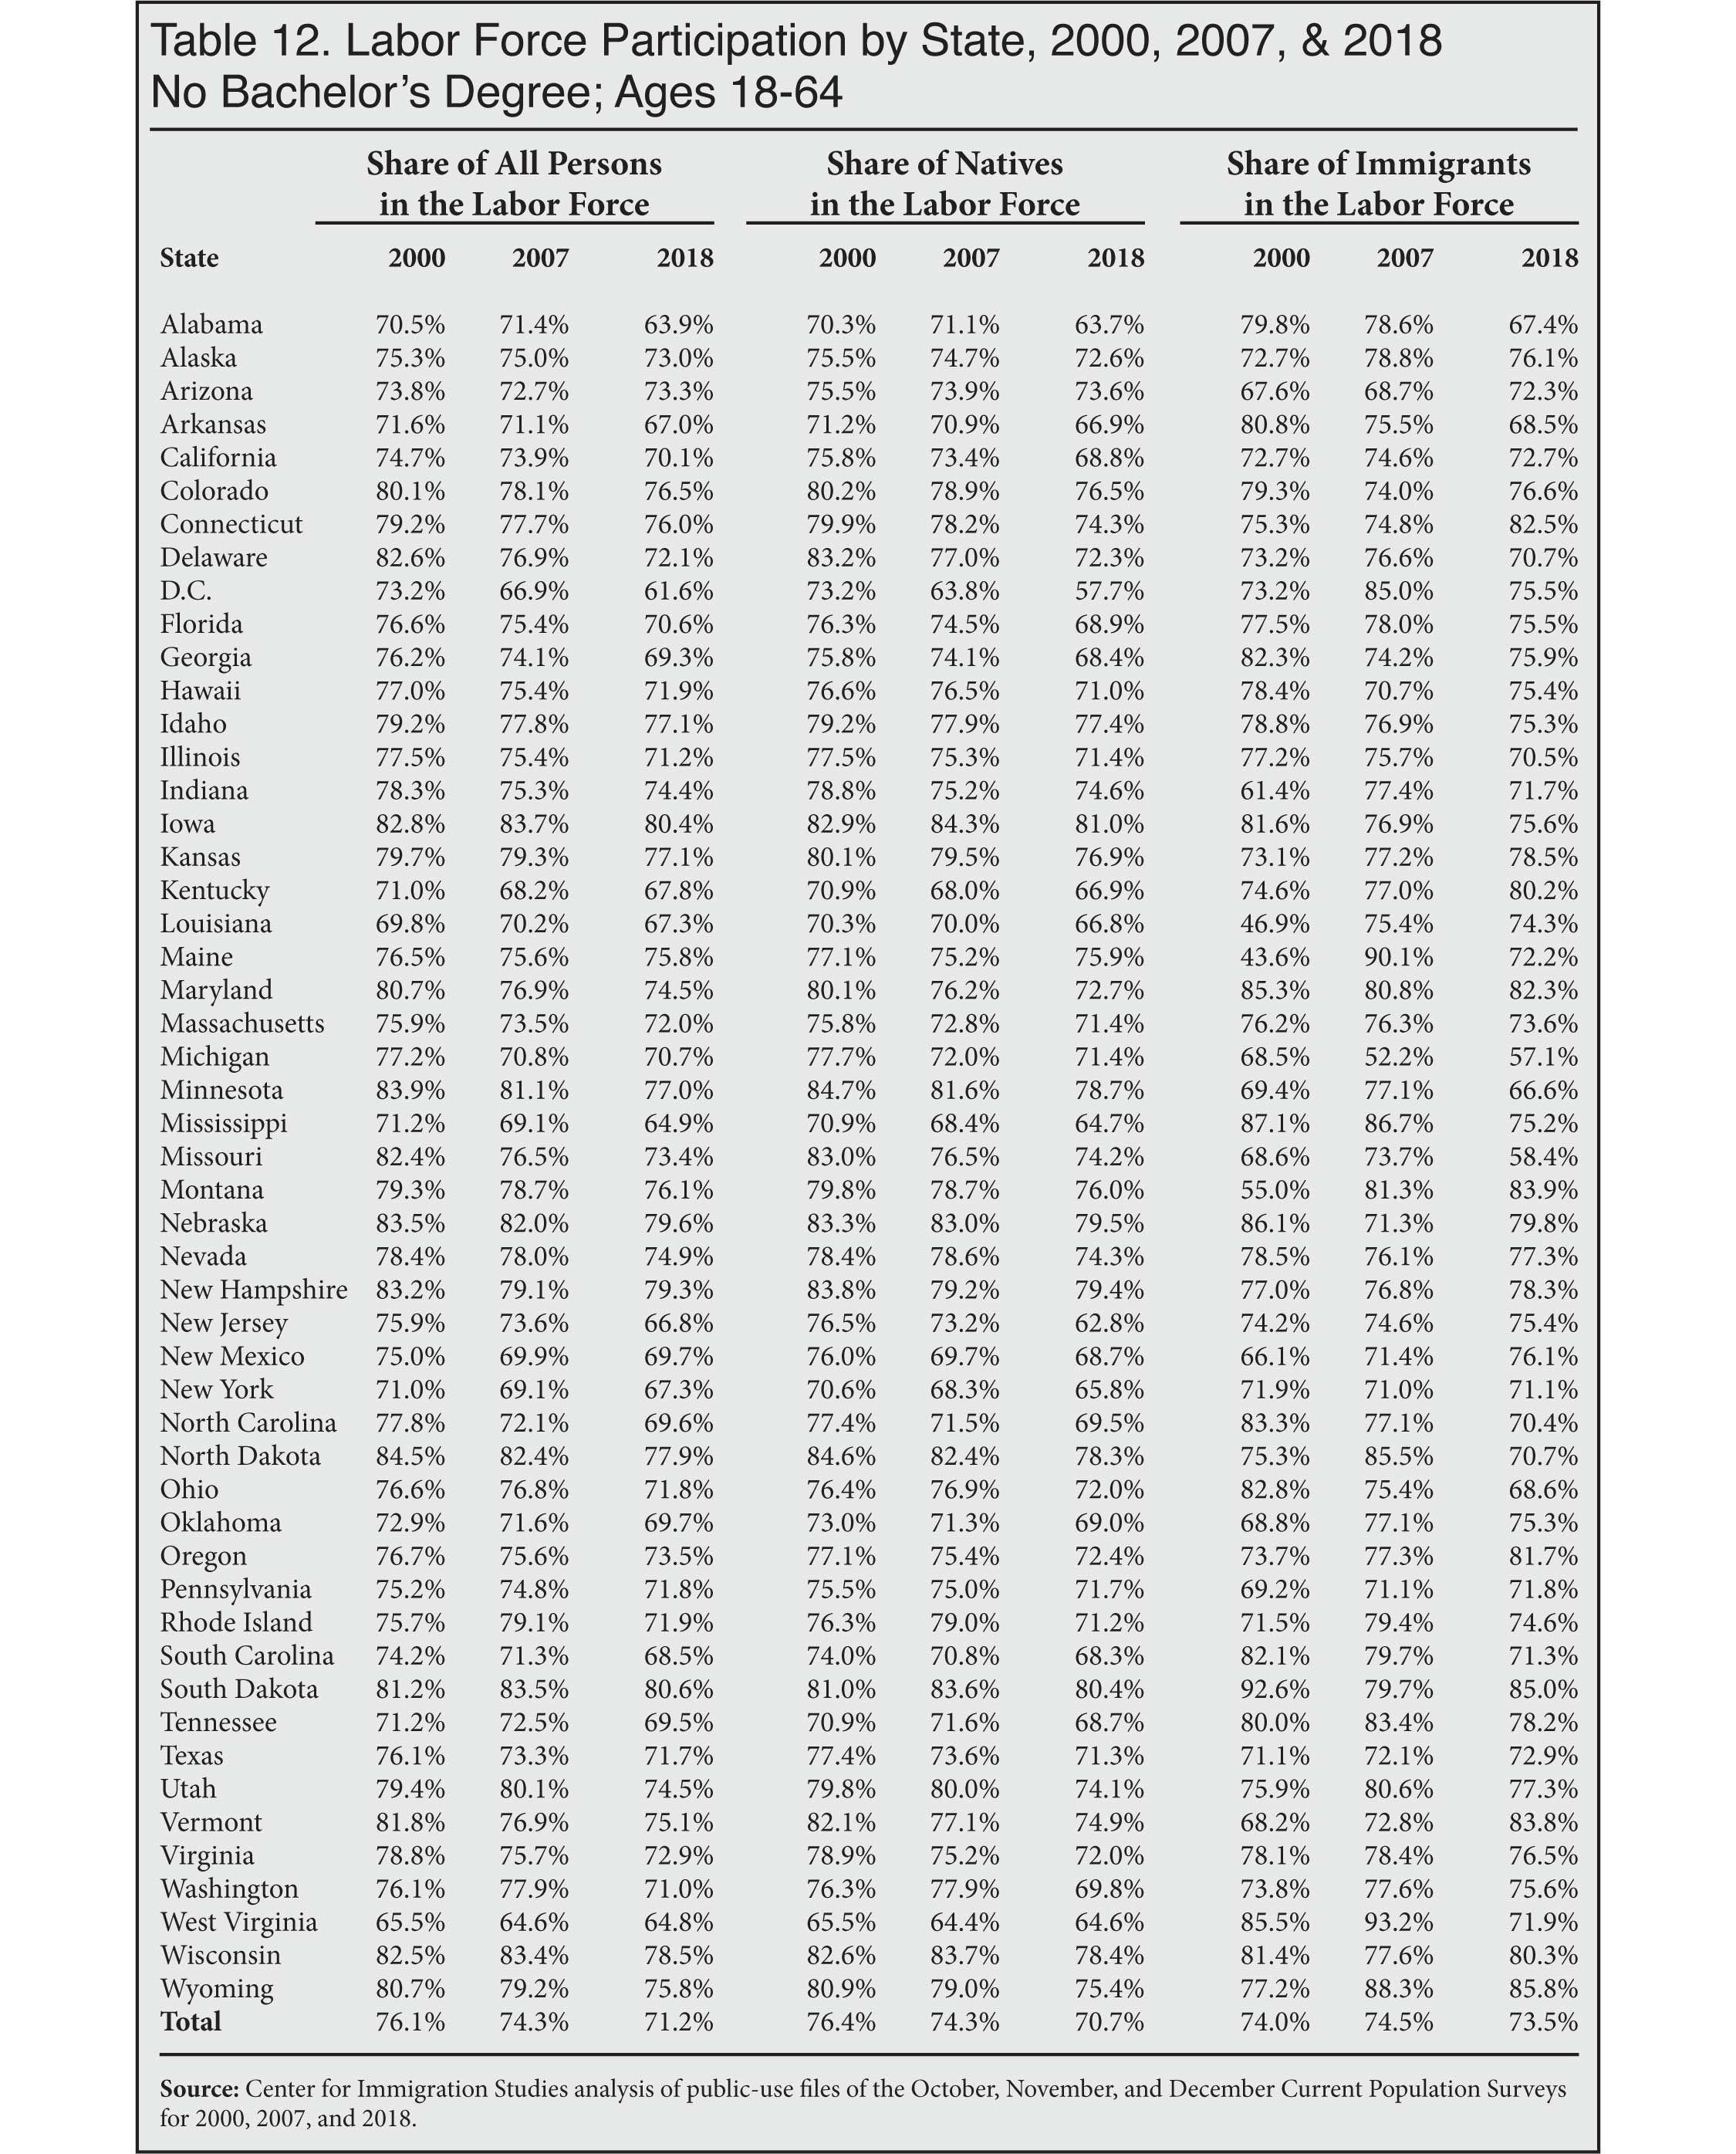 Table: Labor Force Participation by State, 2000, 2007, 2018